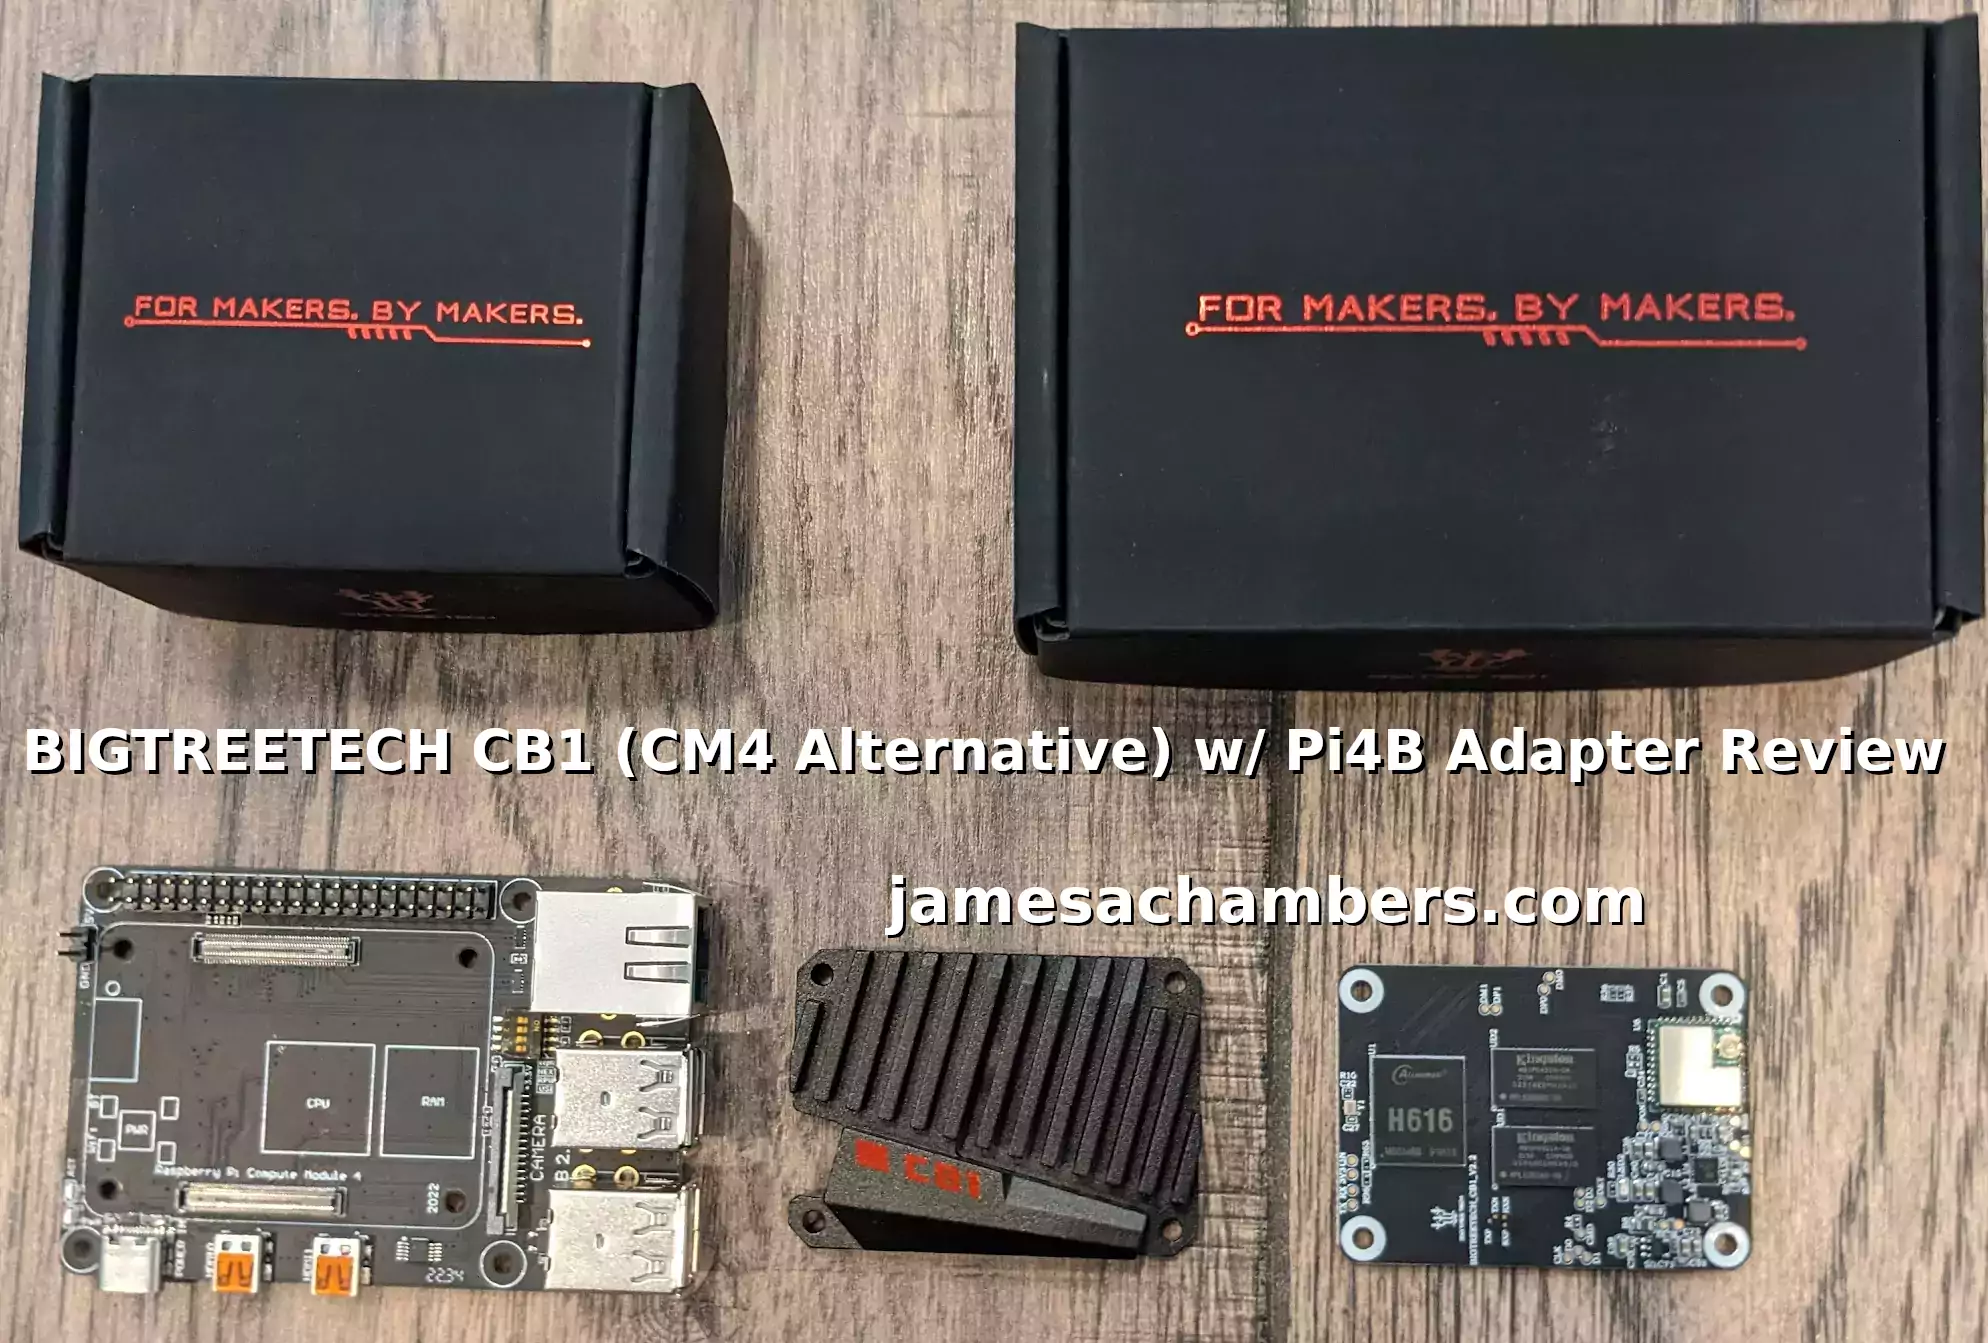 BIGTREETECH CB1 with Pi4B Adapter Review